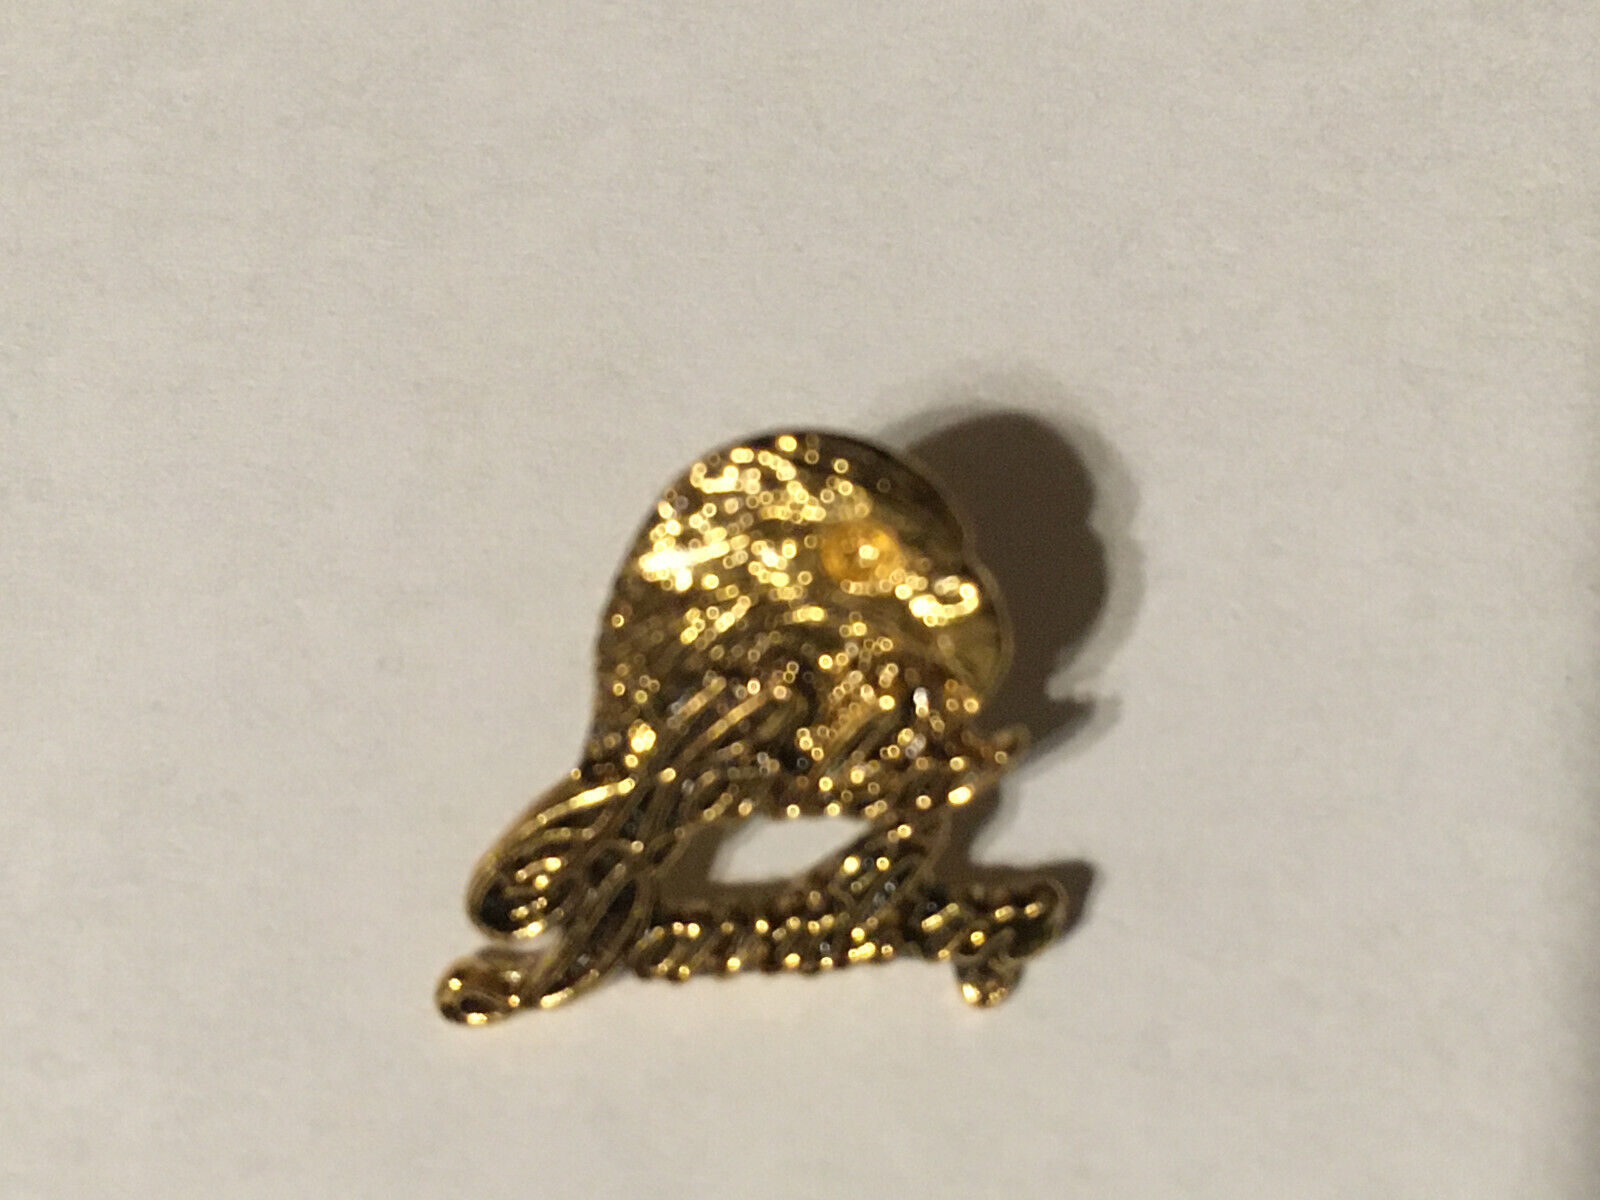 GOLD PLATED HARLEY DAVIDSON MOTORCYCLE VEST PIN BALD EAGLE / WRONGWAY052